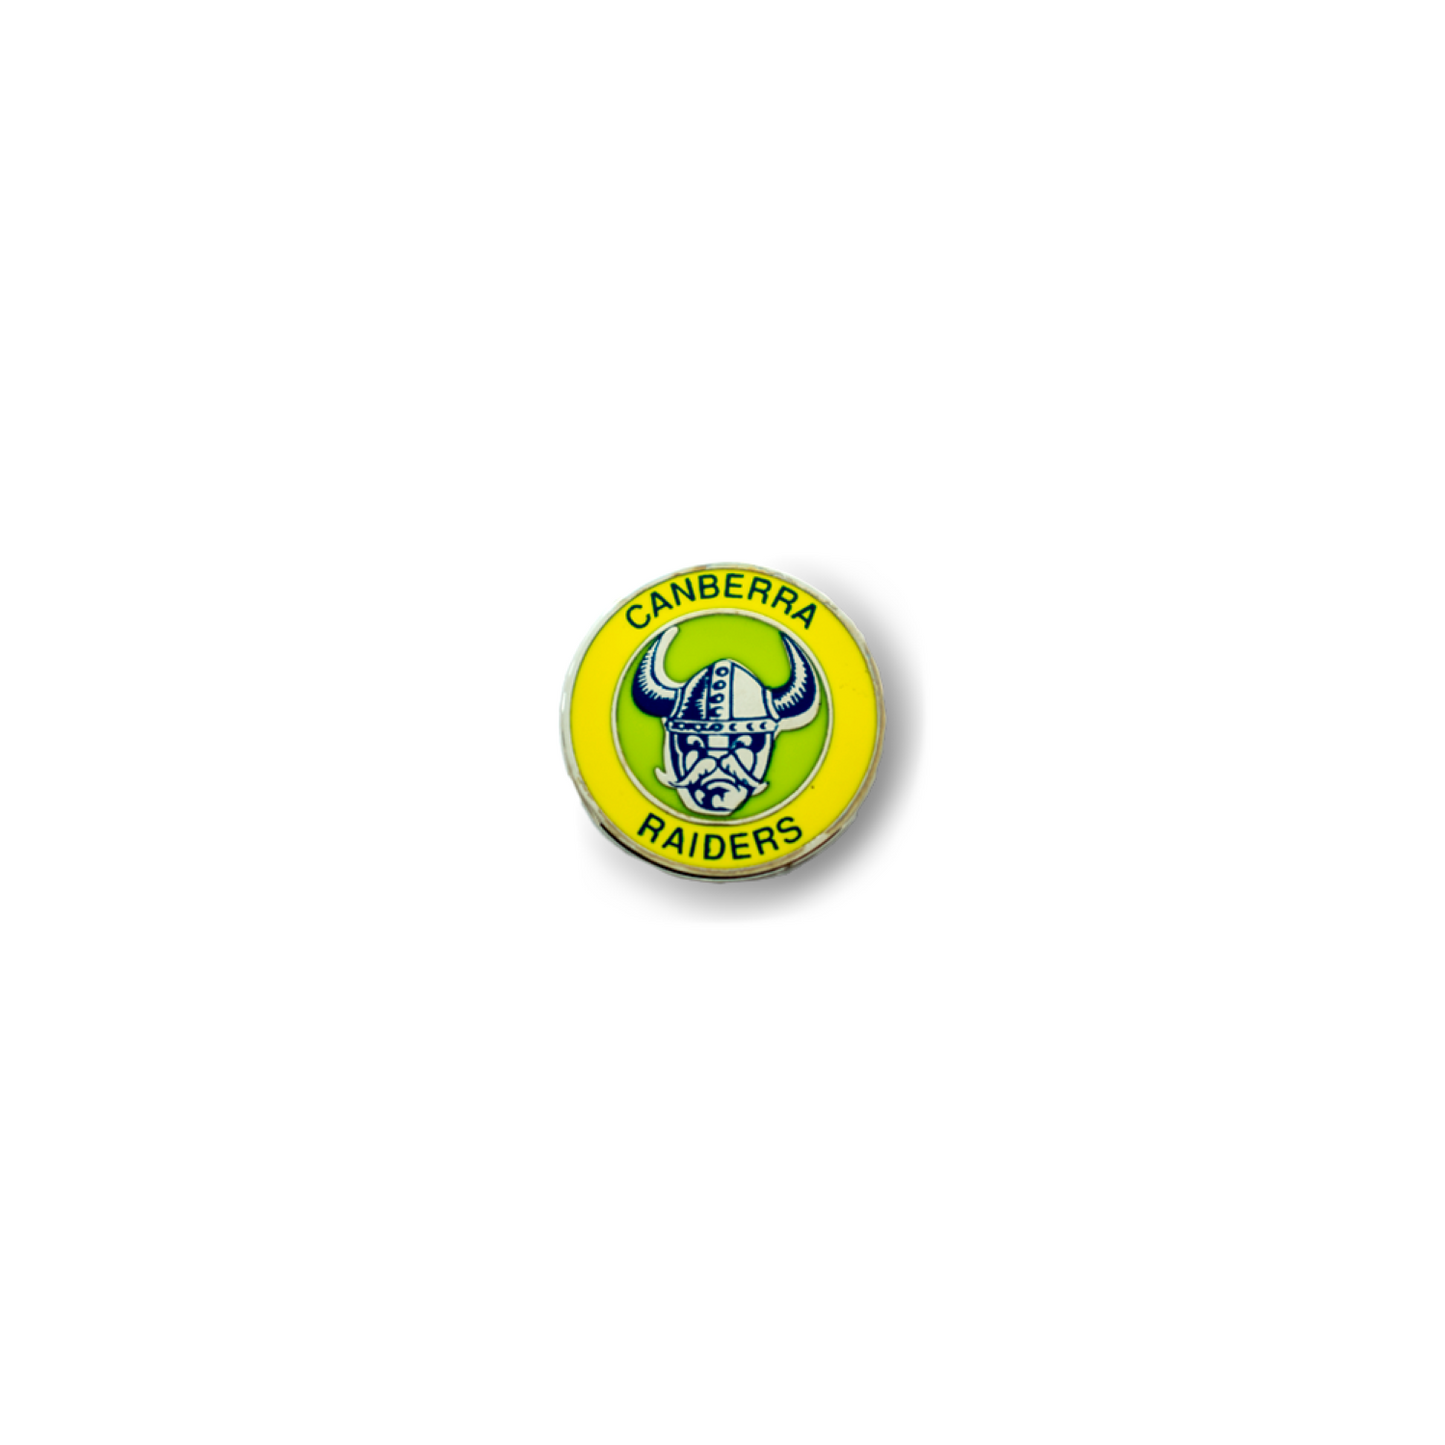 Canberra Raiders Heritage Pin